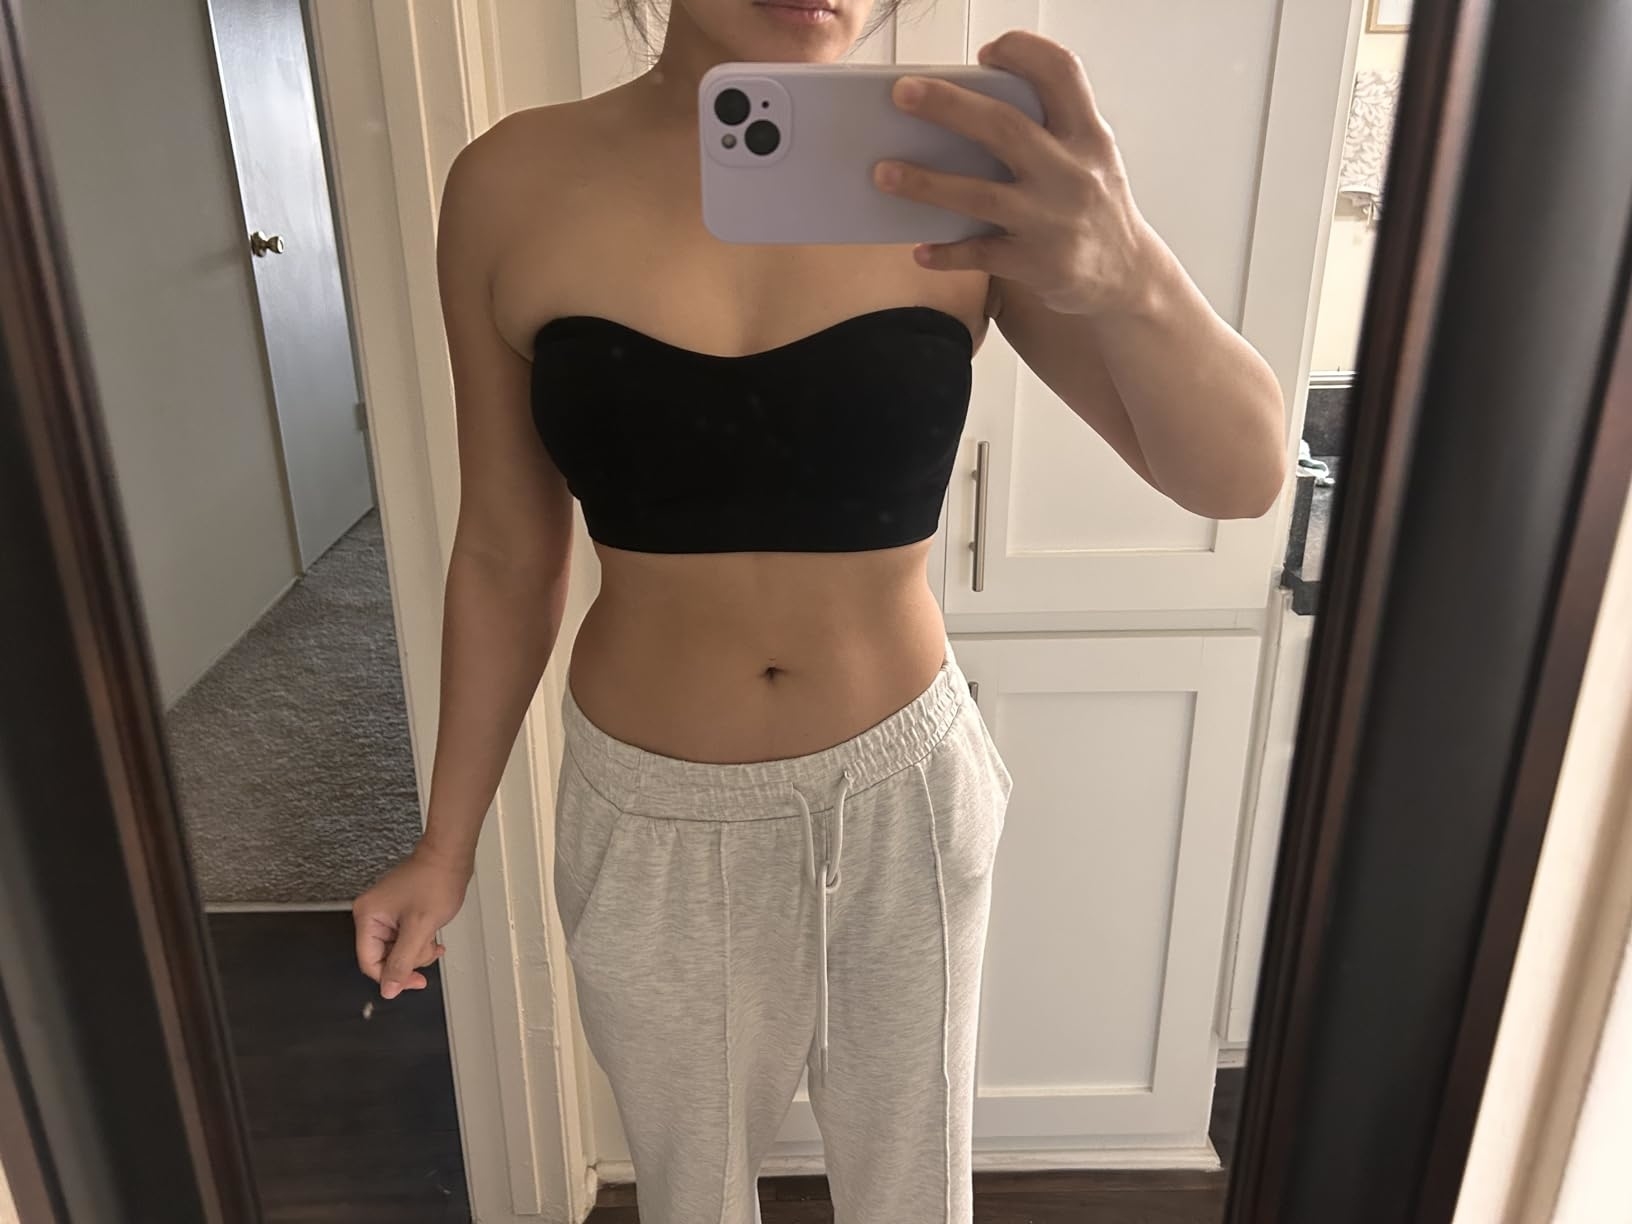 reviewer in mirror taking a photo wearing the black strapless bandeau bra and grey sweatpants